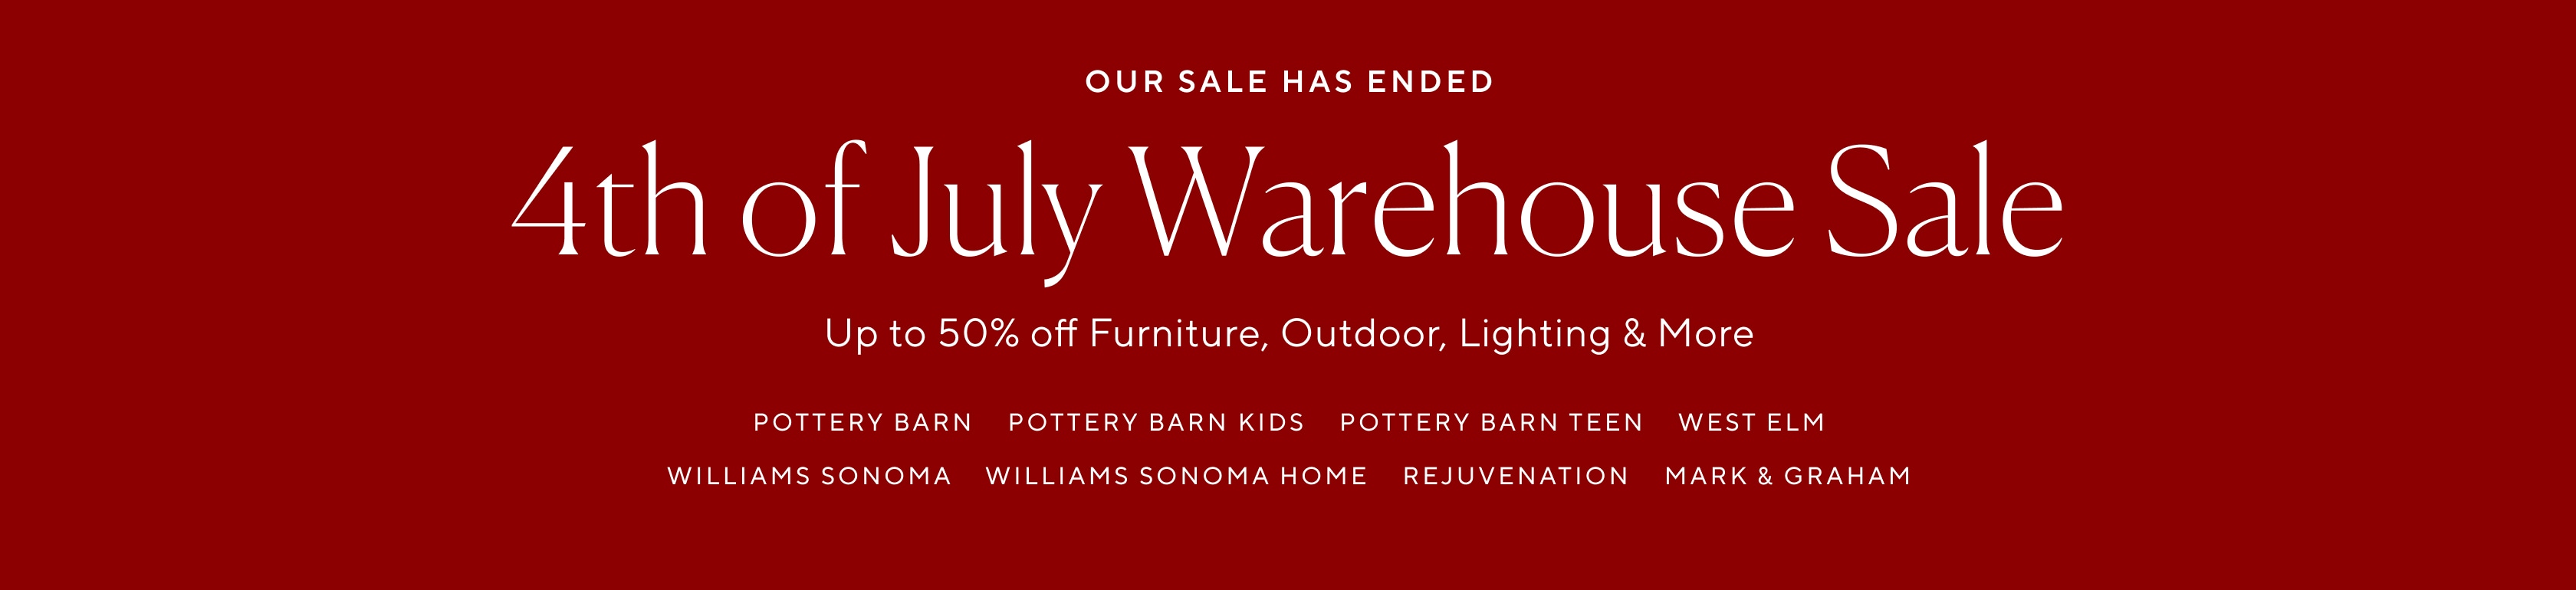 4th of July Warehouse Sale